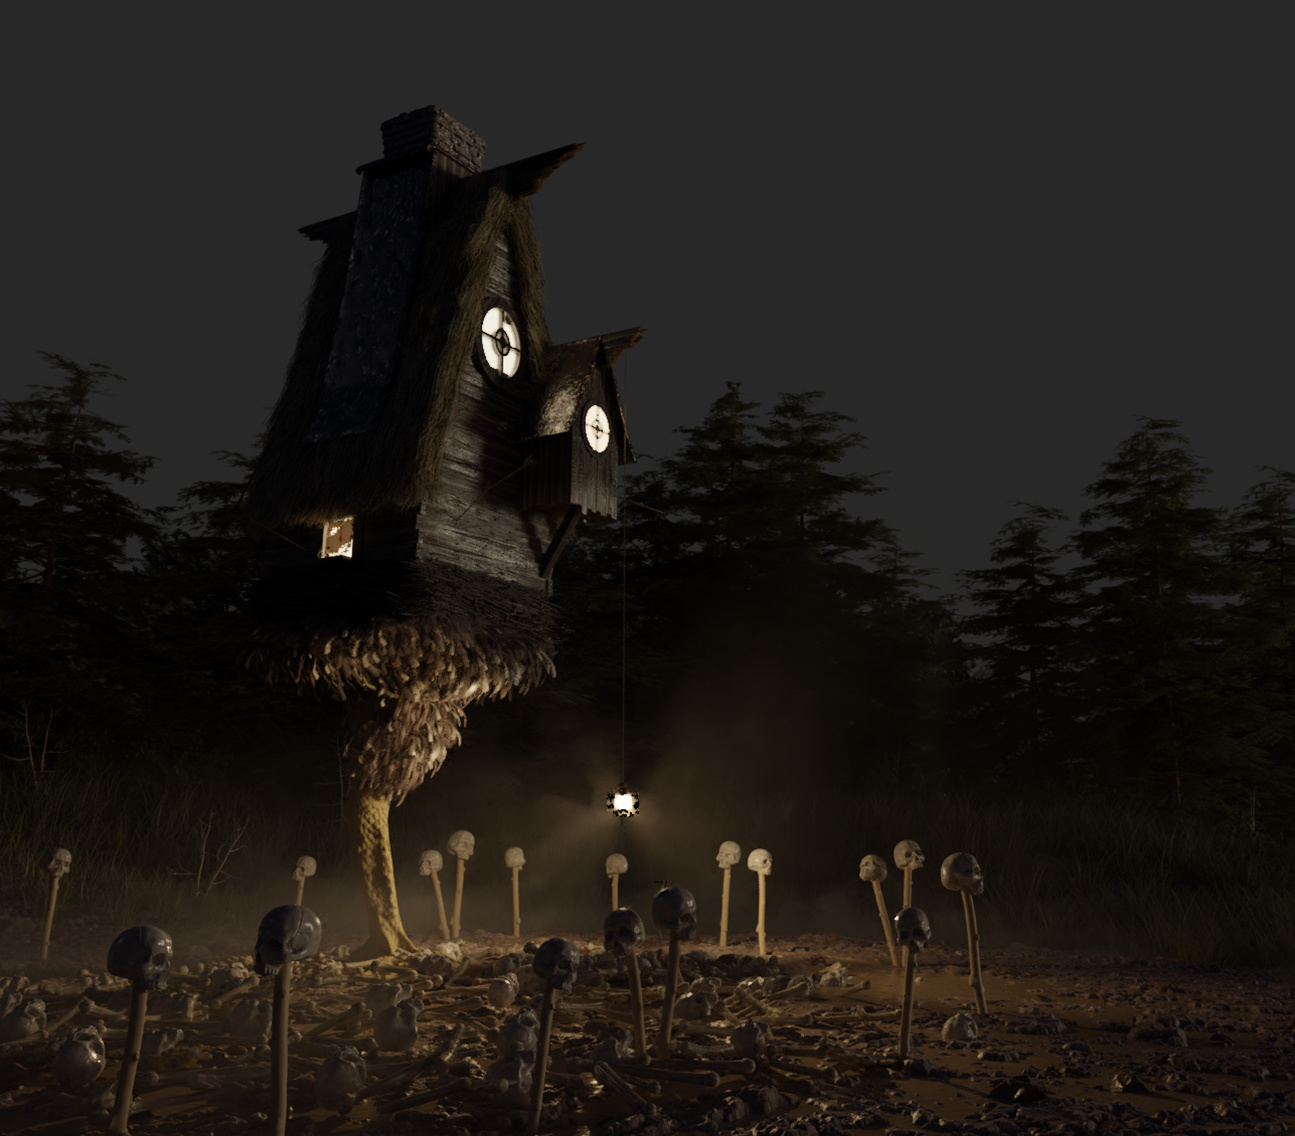 Baba Yaga's Hut - Finished Projects - Blender Artists Commun